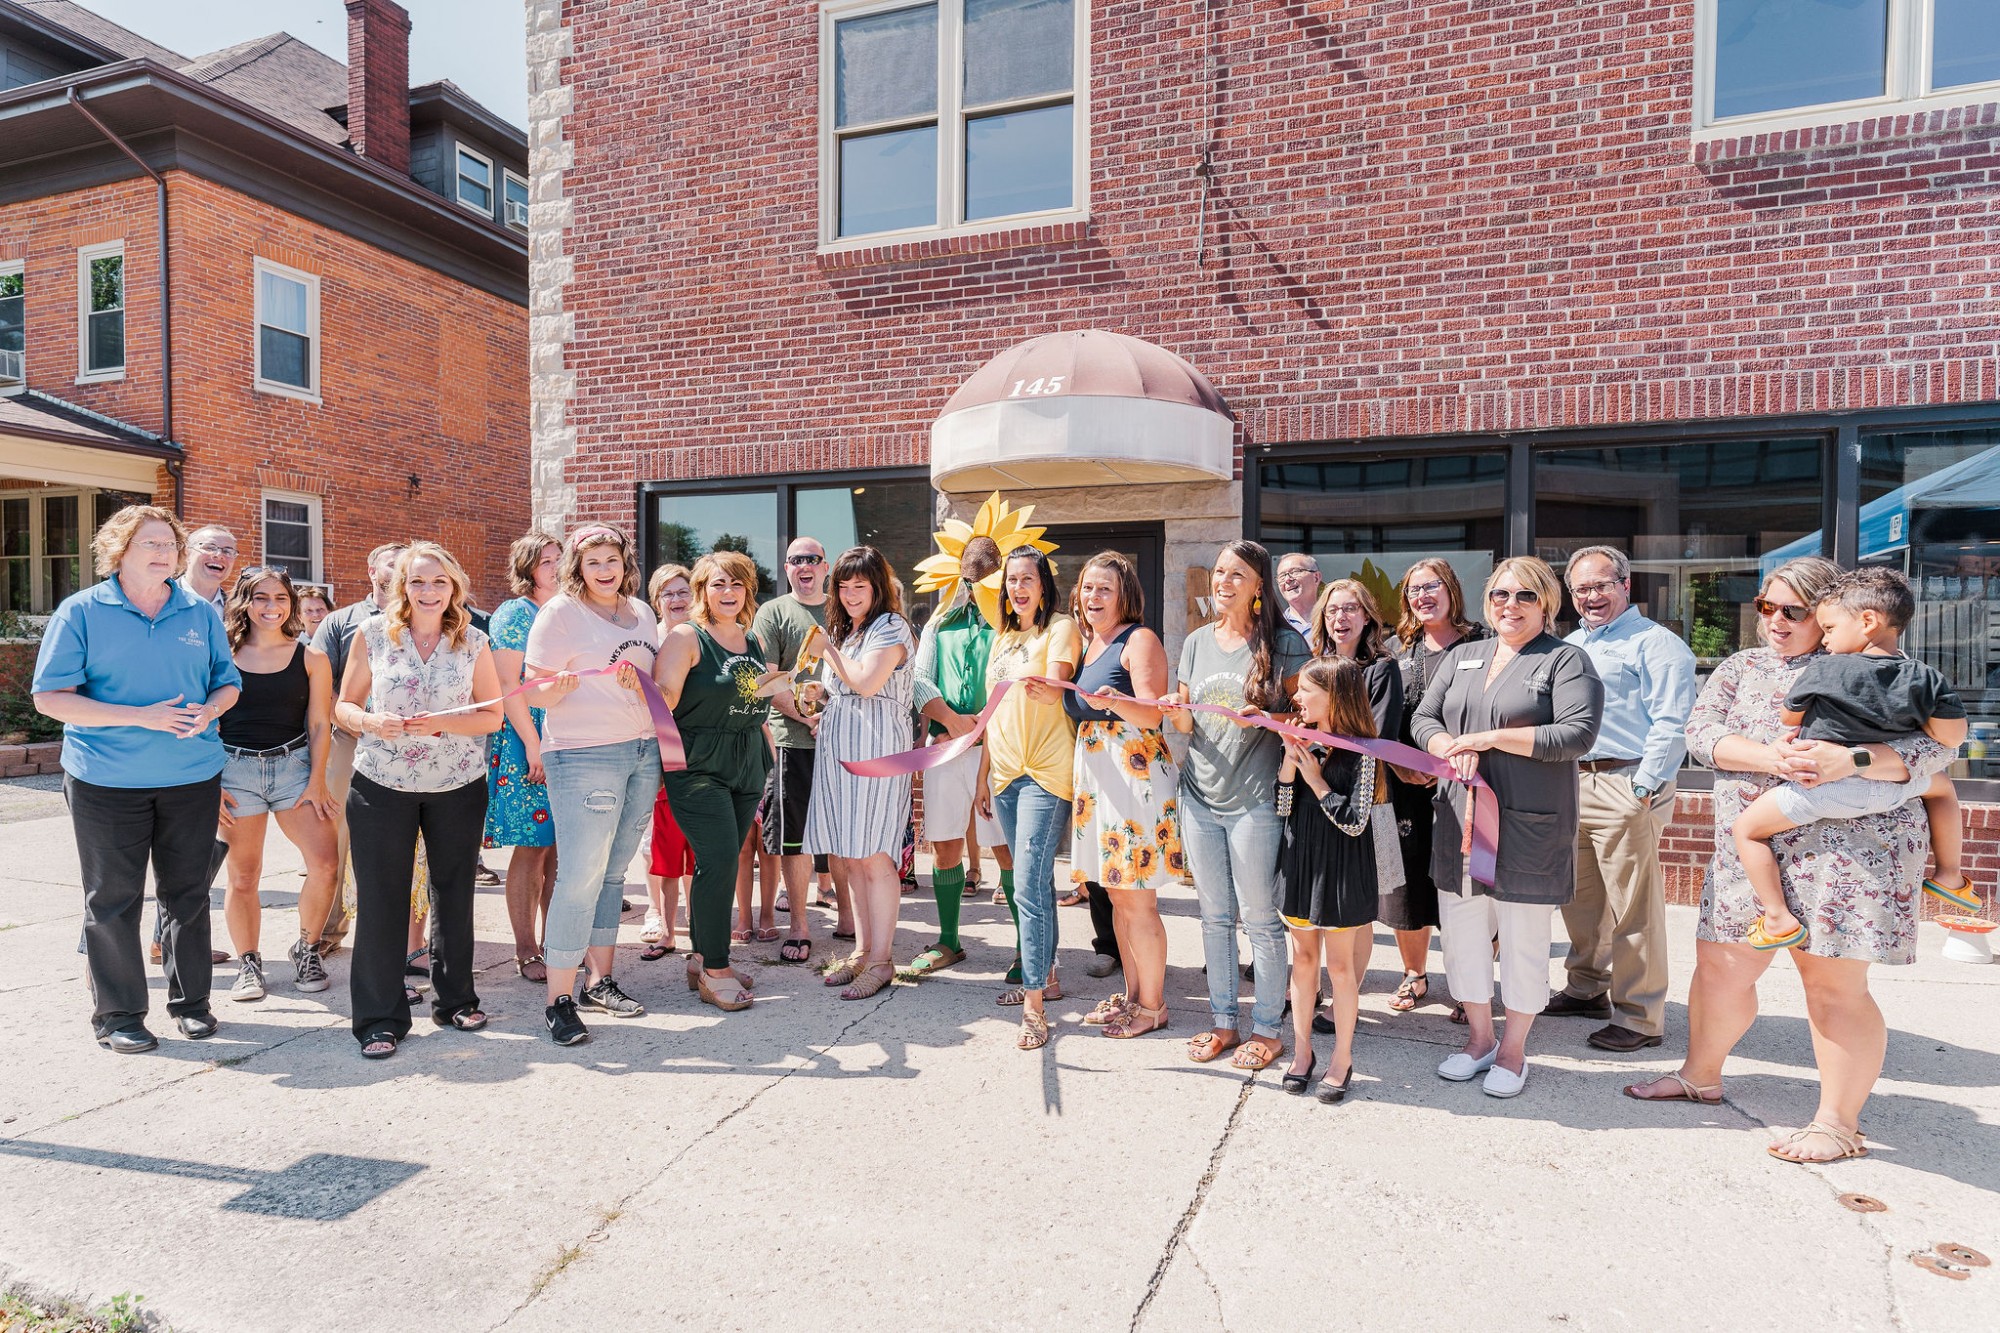 JAM's Monthly Market Cuts Ribbon on Expansion